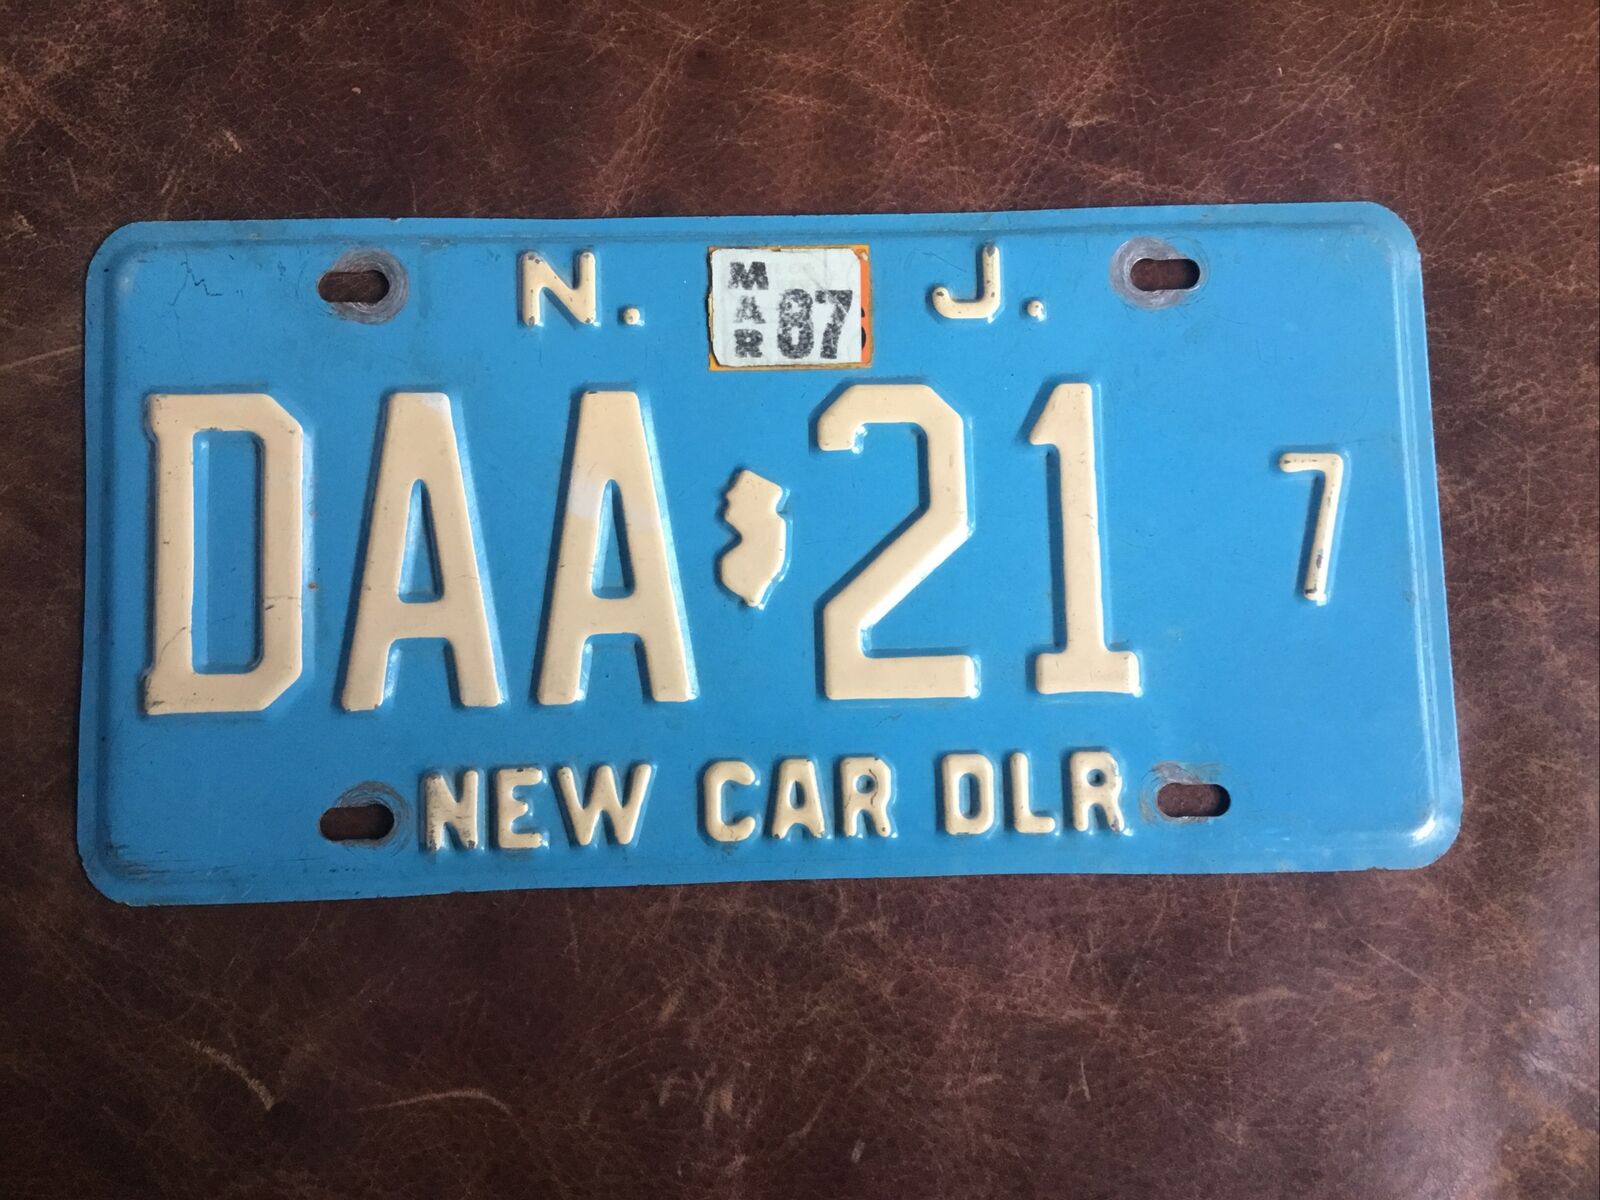 1987 NEW JERSEY NEW CAR DEALER LICENSE PLATE. Vintage Tag #DAA 21 7. Heavy